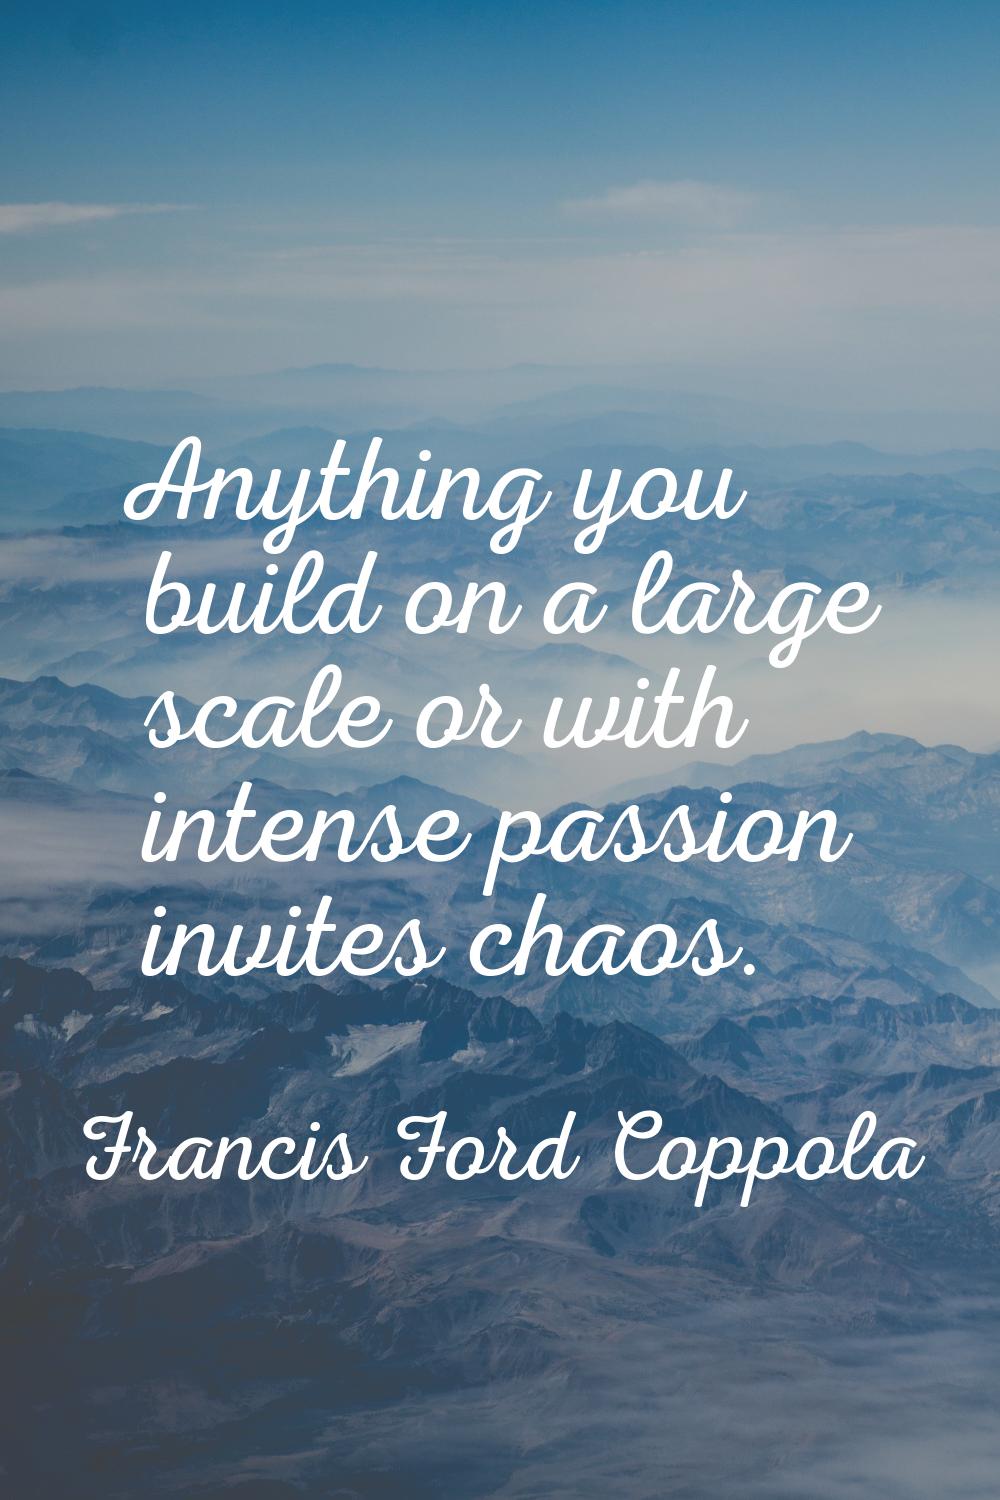 Anything you build on a large scale or with intense passion invites chaos.